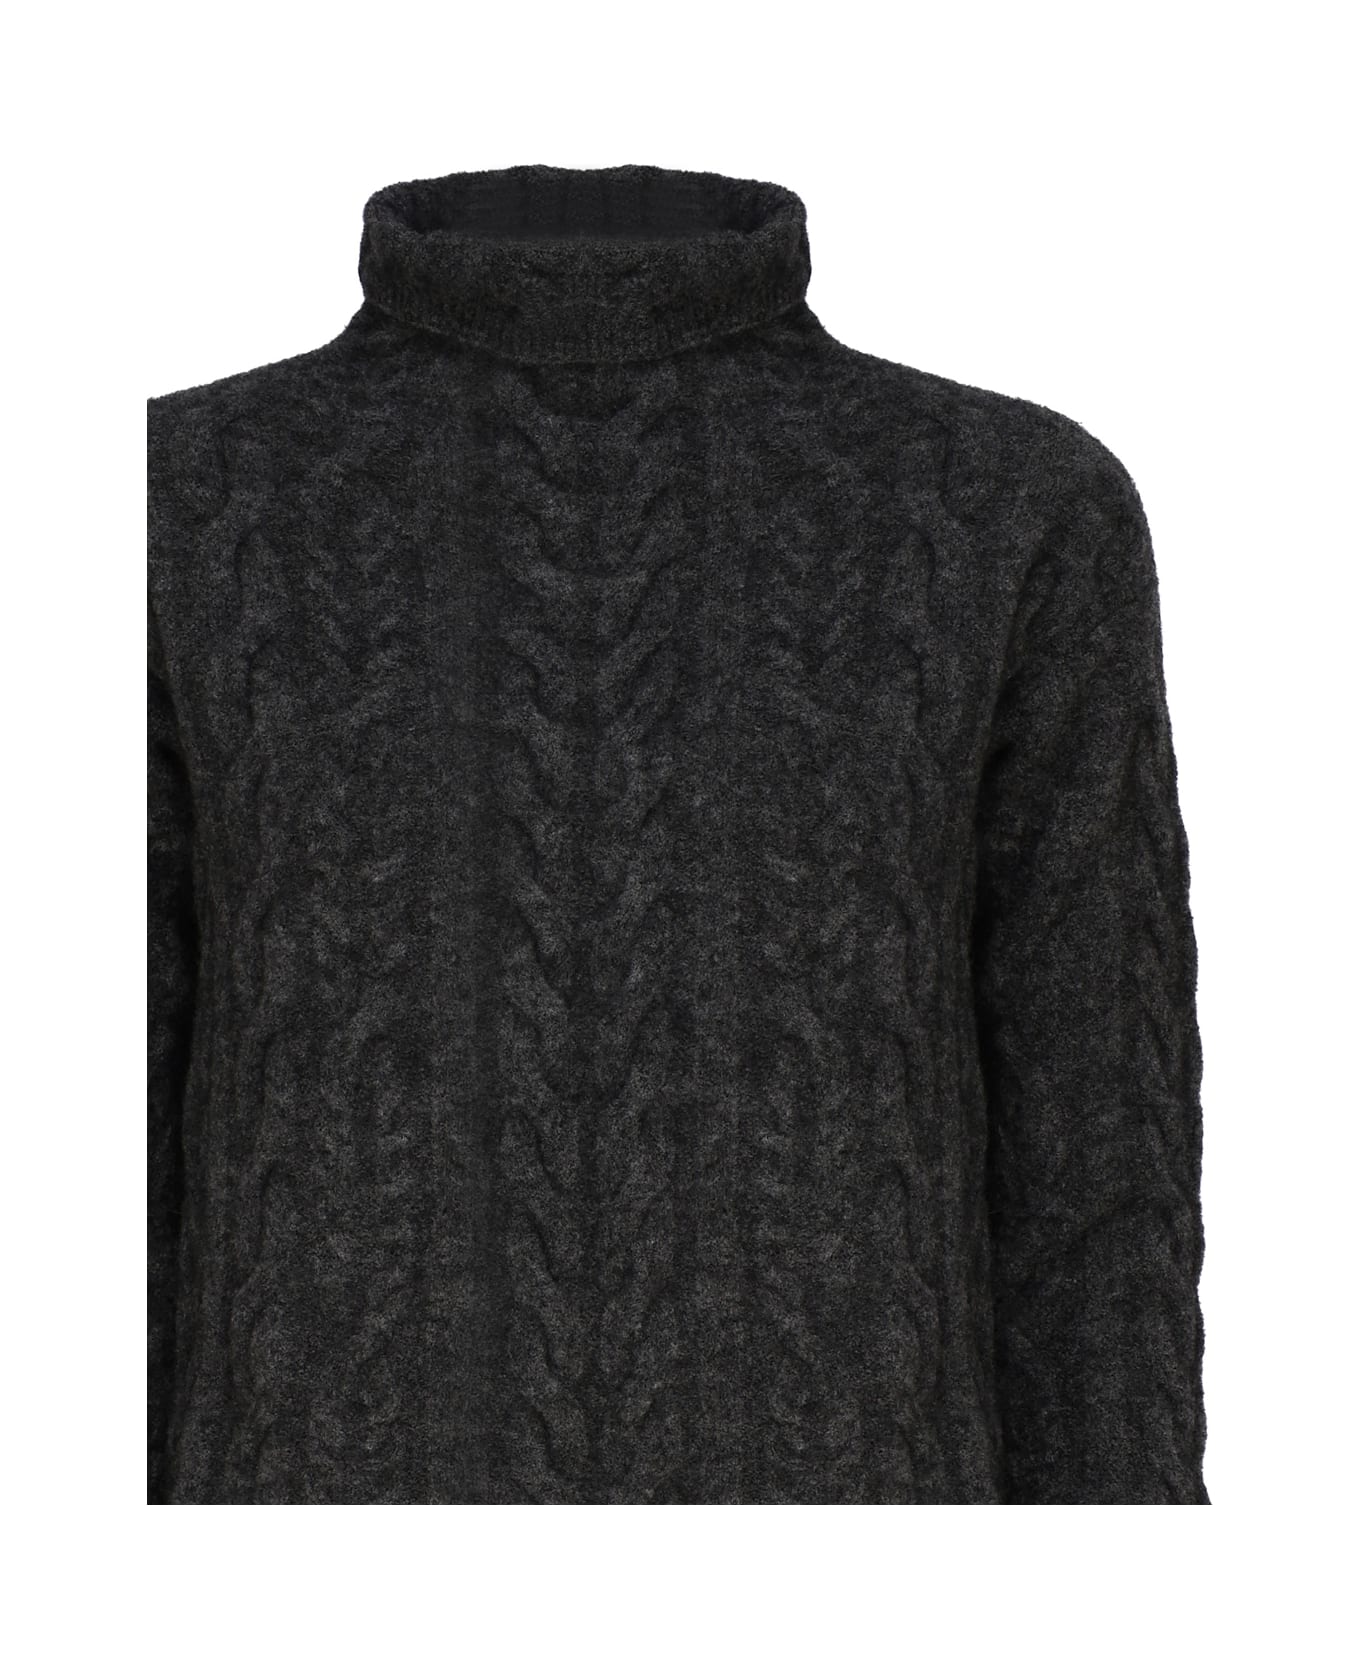 'S Max Mara Turtleneck Sweater In Wool And Mohair - Grey